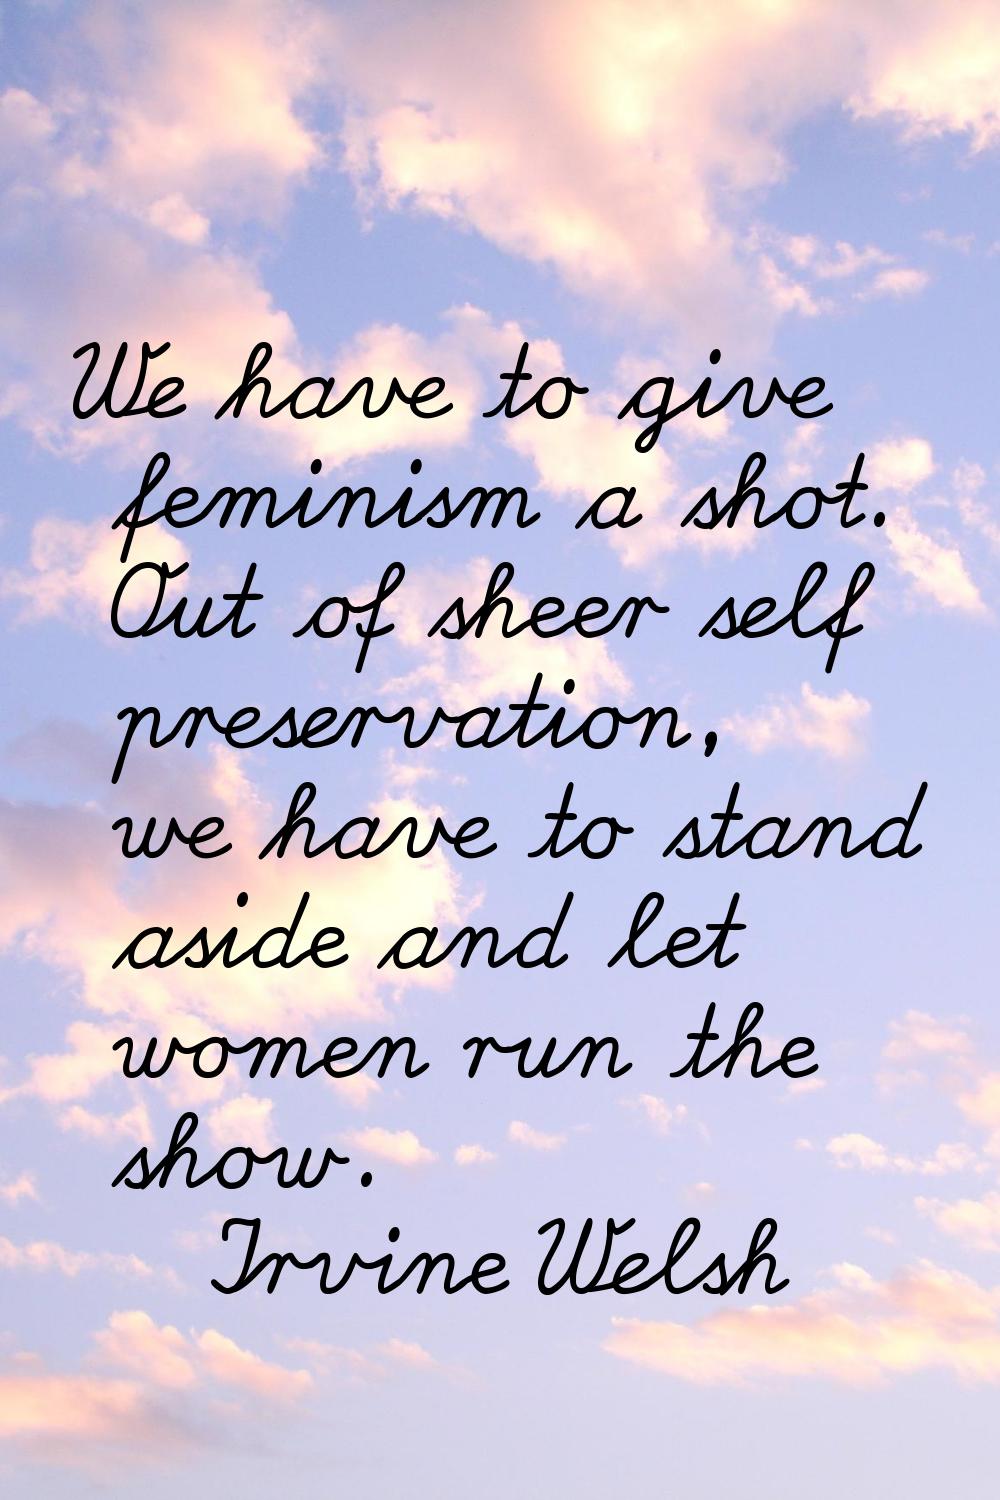 We have to give feminism a shot. Out of sheer self preservation, we have to stand aside and let wom